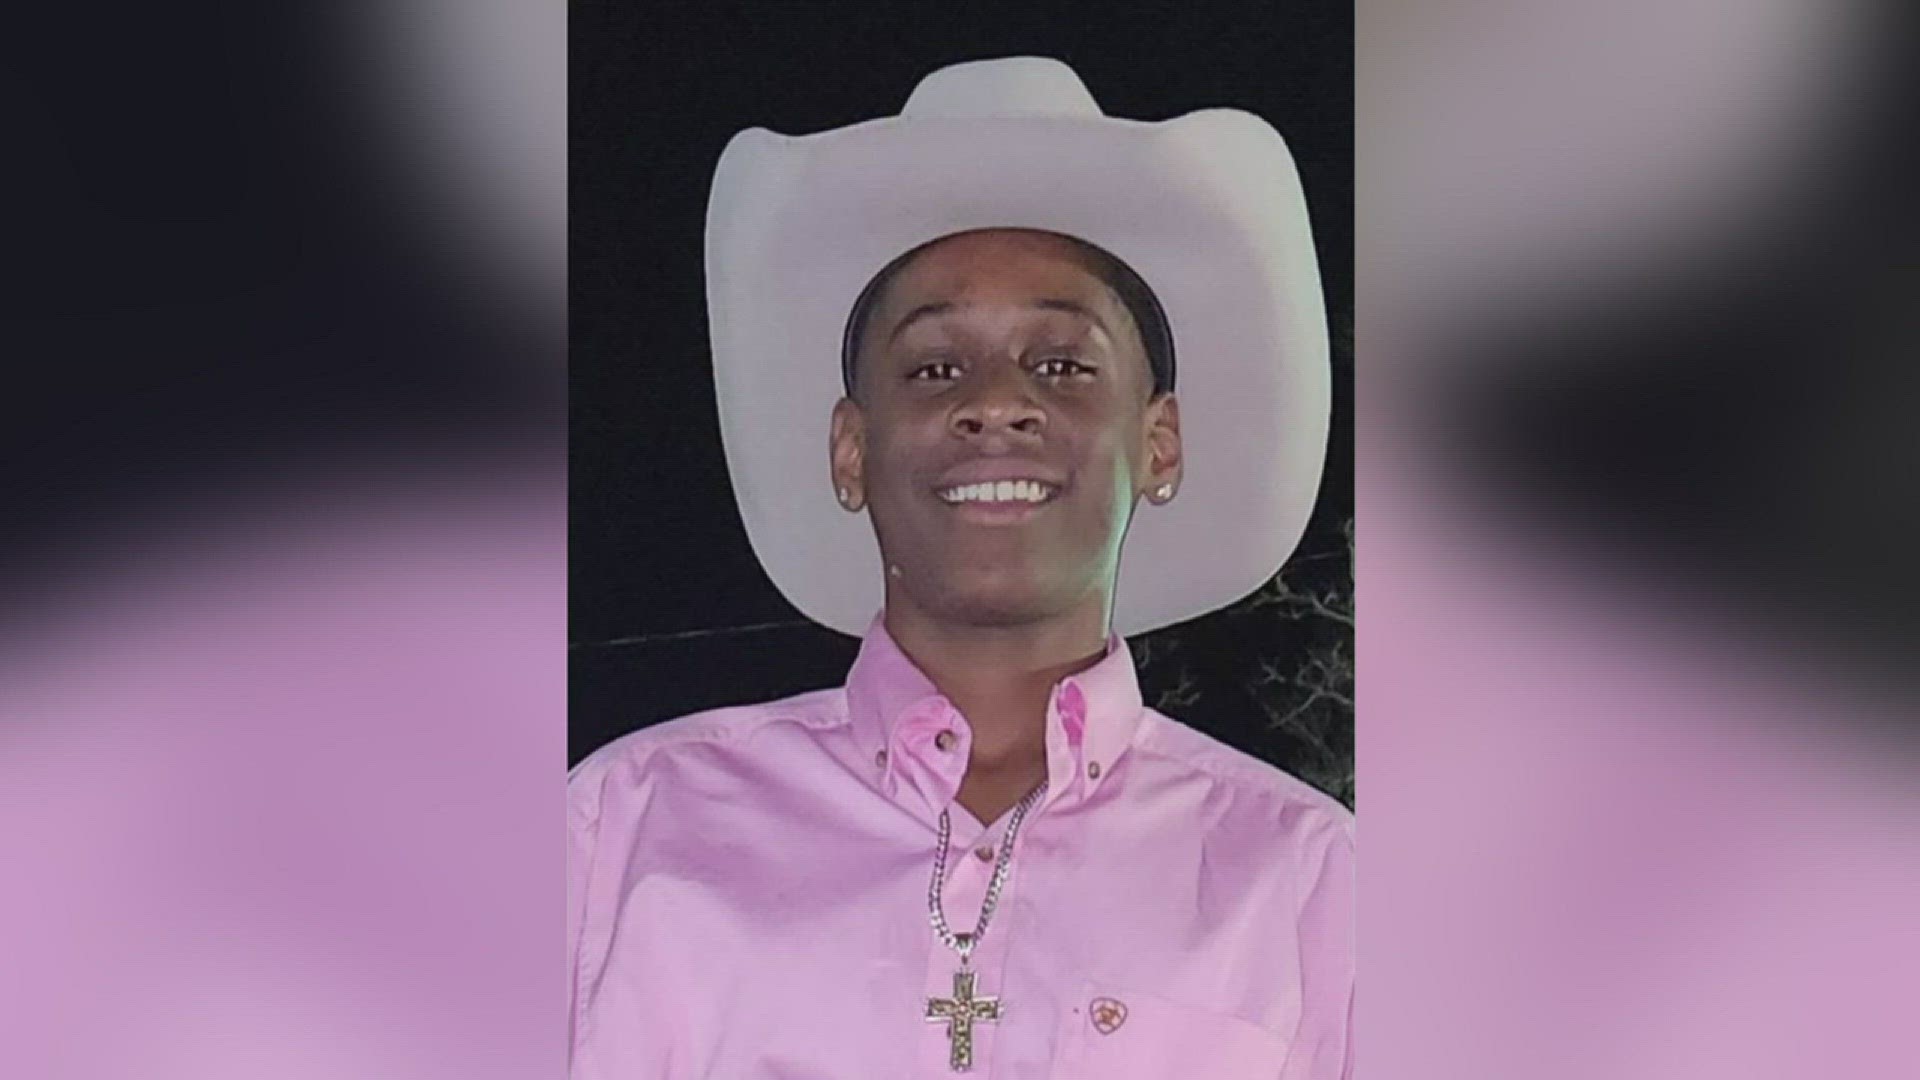 Ta'dran Carmon was a senior at Beaumont United High School. He was found dead inside his car on Tuesday evening.